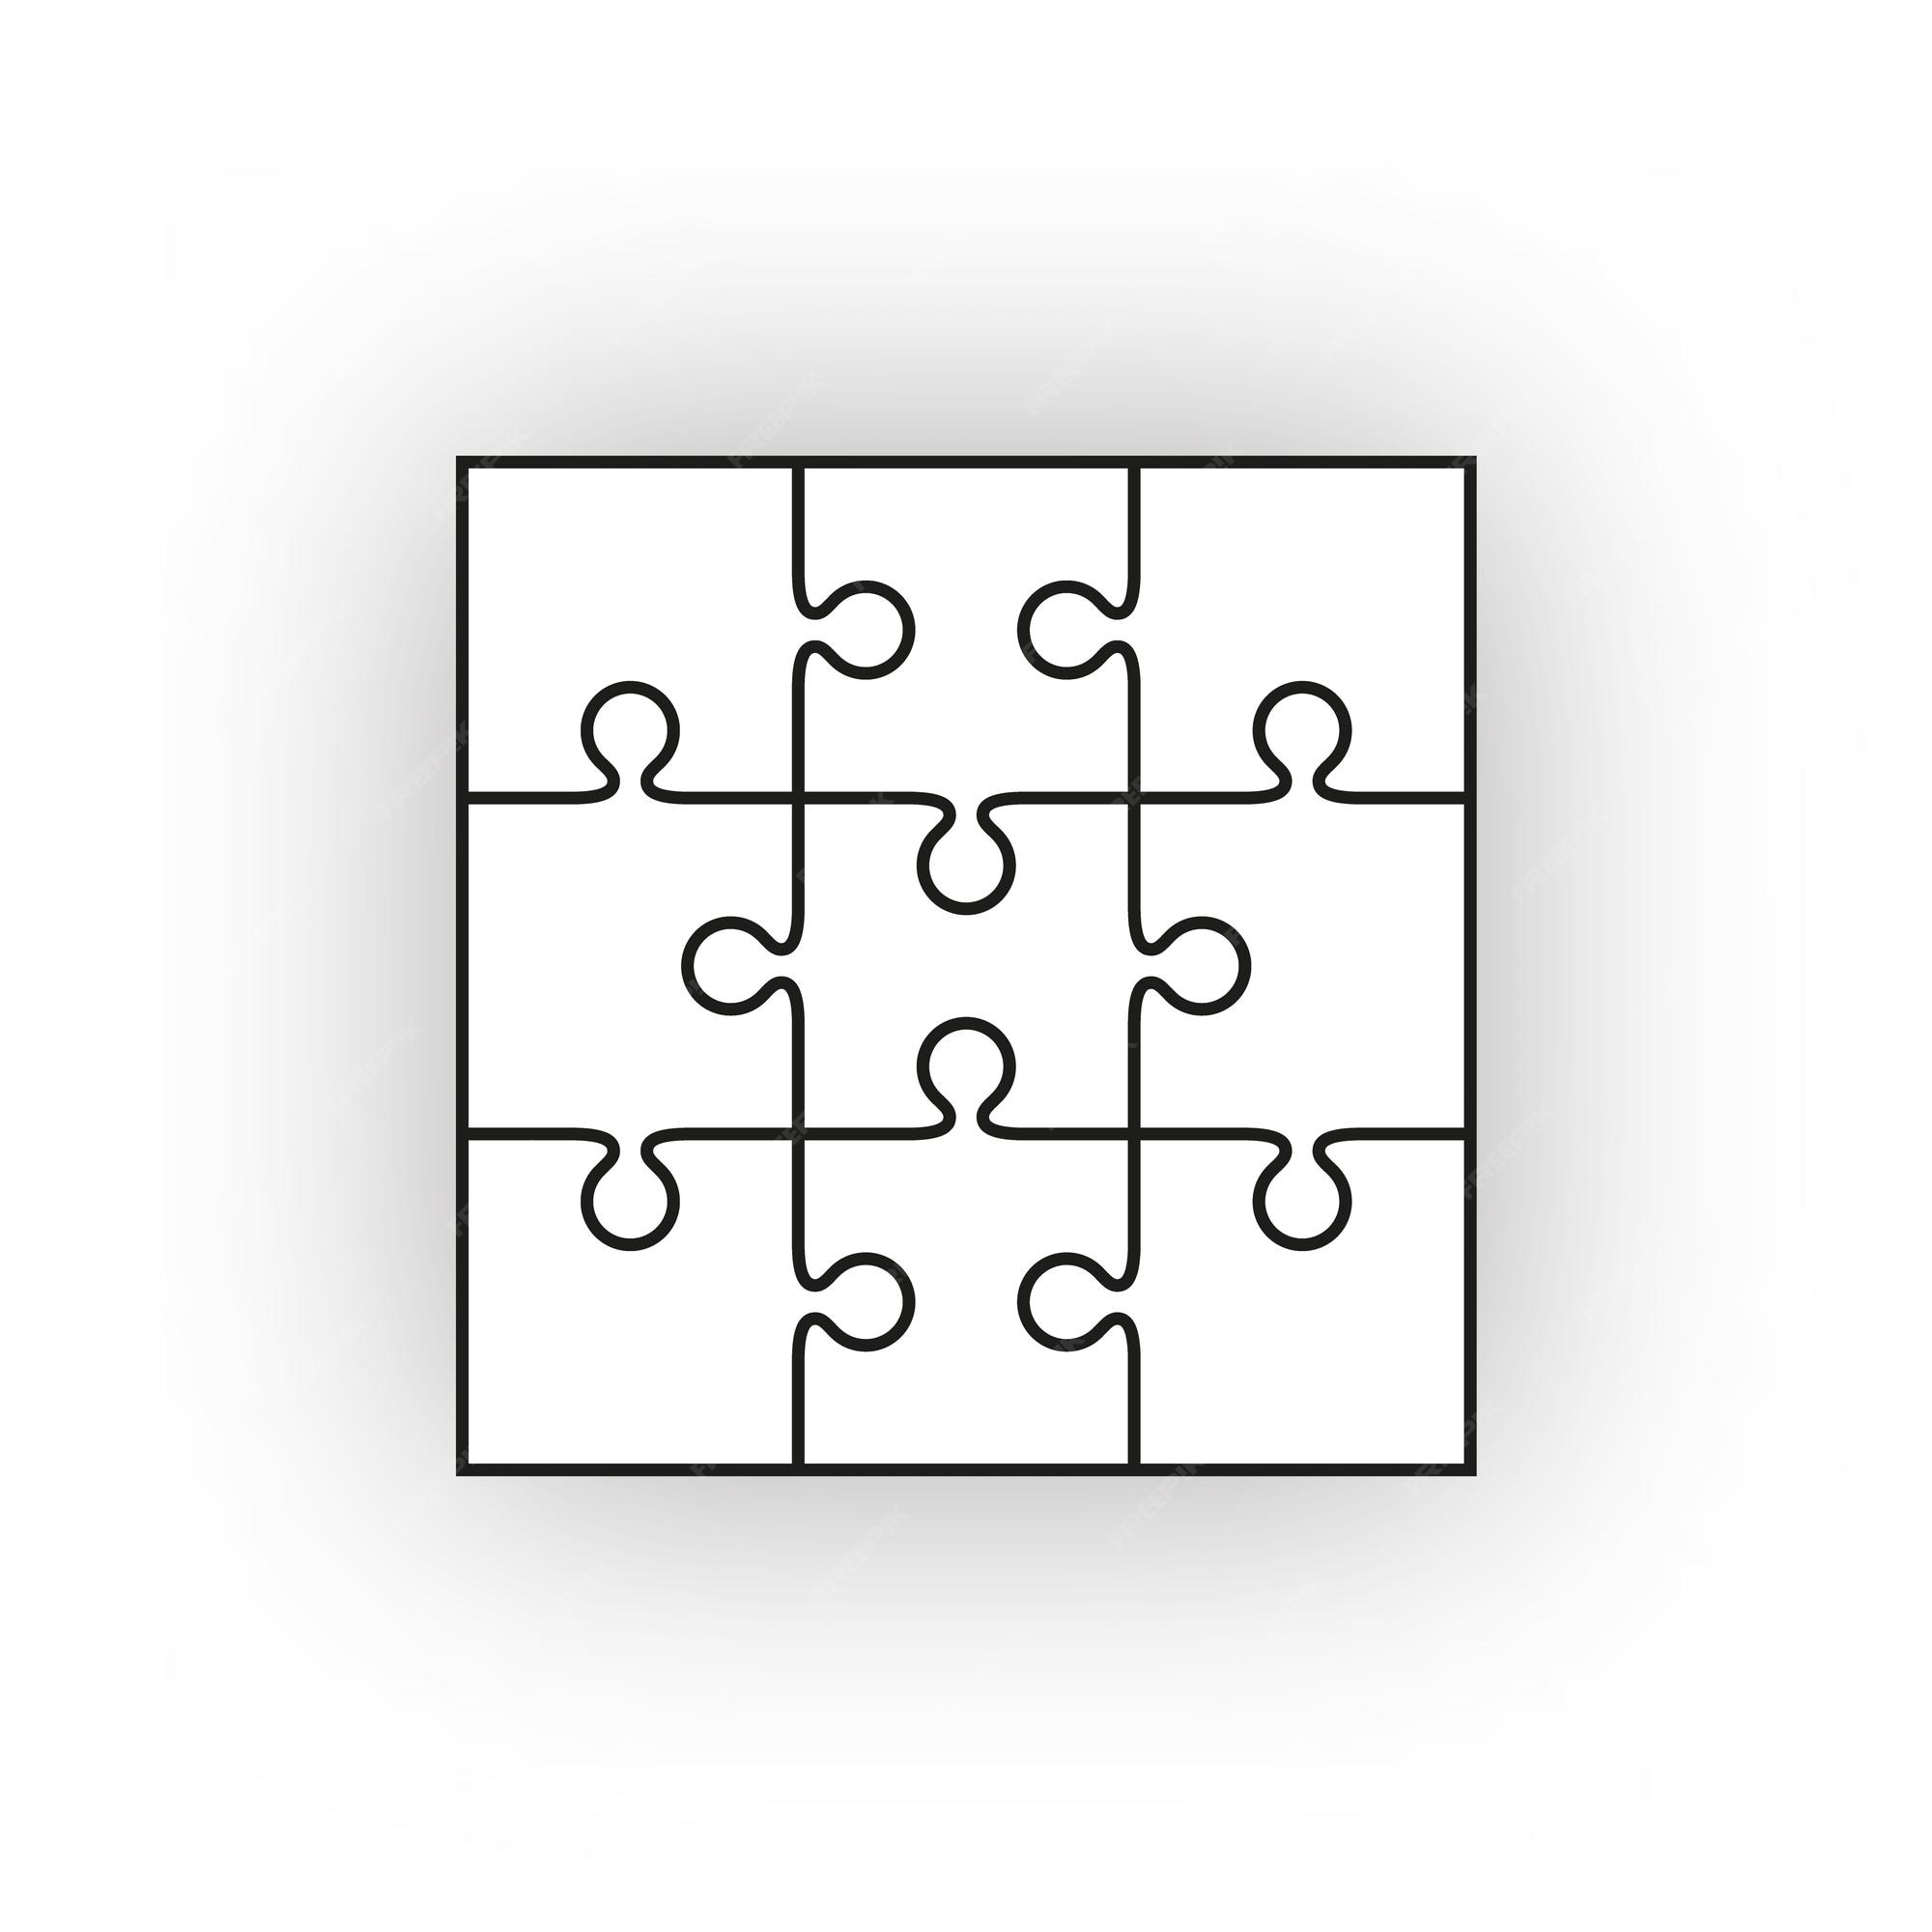 Vector | Puzzle pieces set. jigsaw grid. thinking mosaic game with 3x3 details. simple background with 9 separate